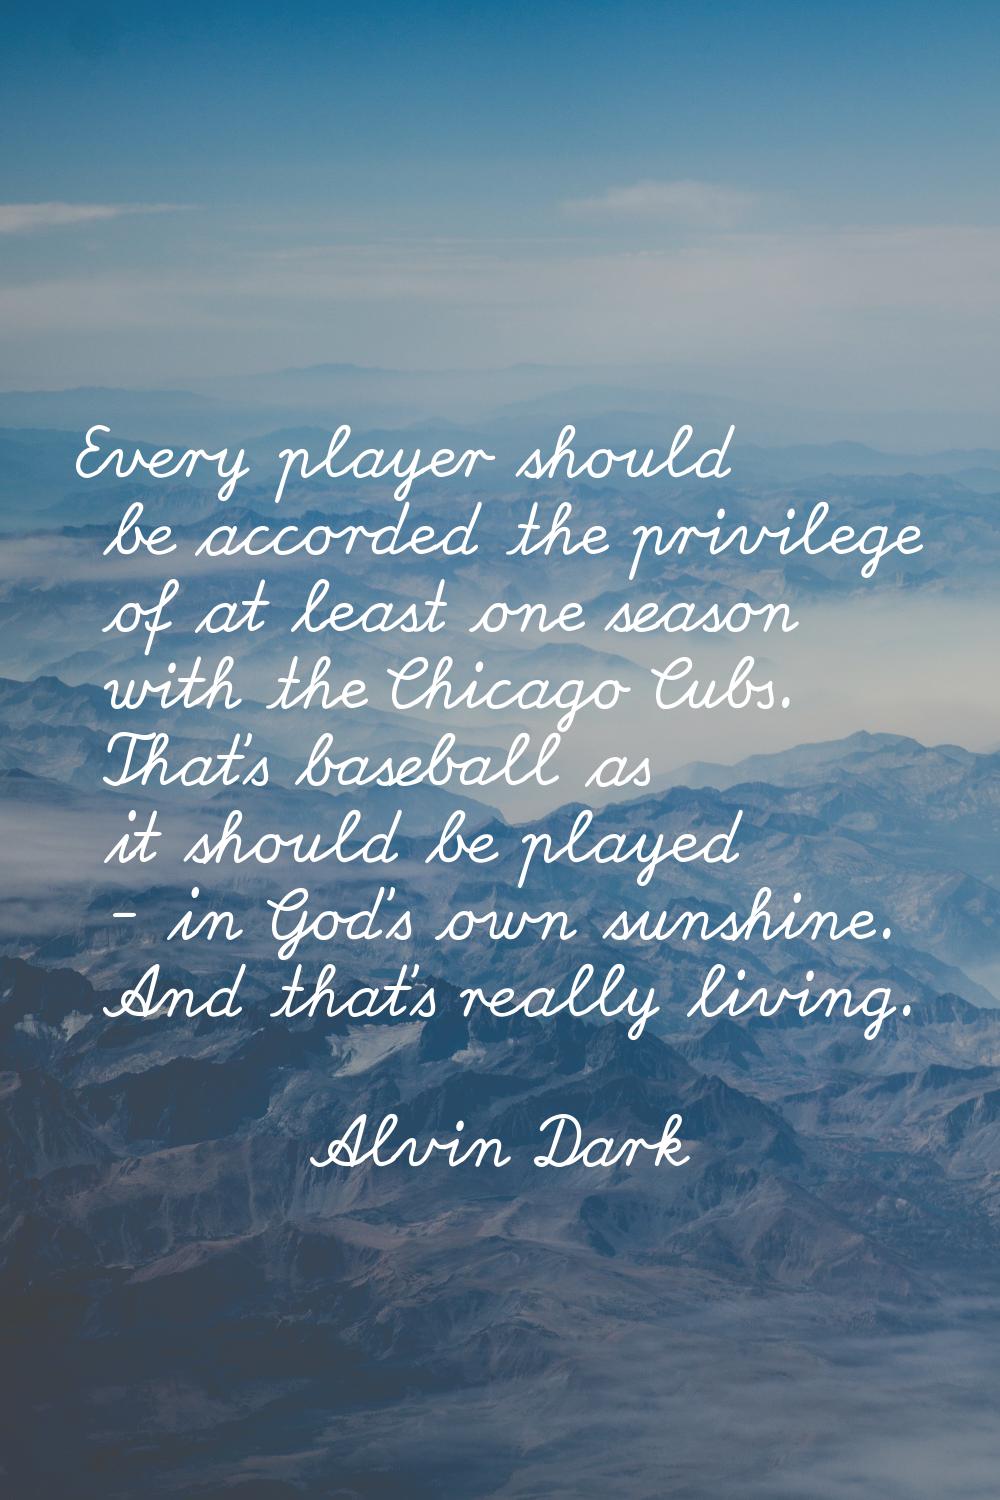 Every player should be accorded the privilege of at least one season with the Chicago Cubs. That's 